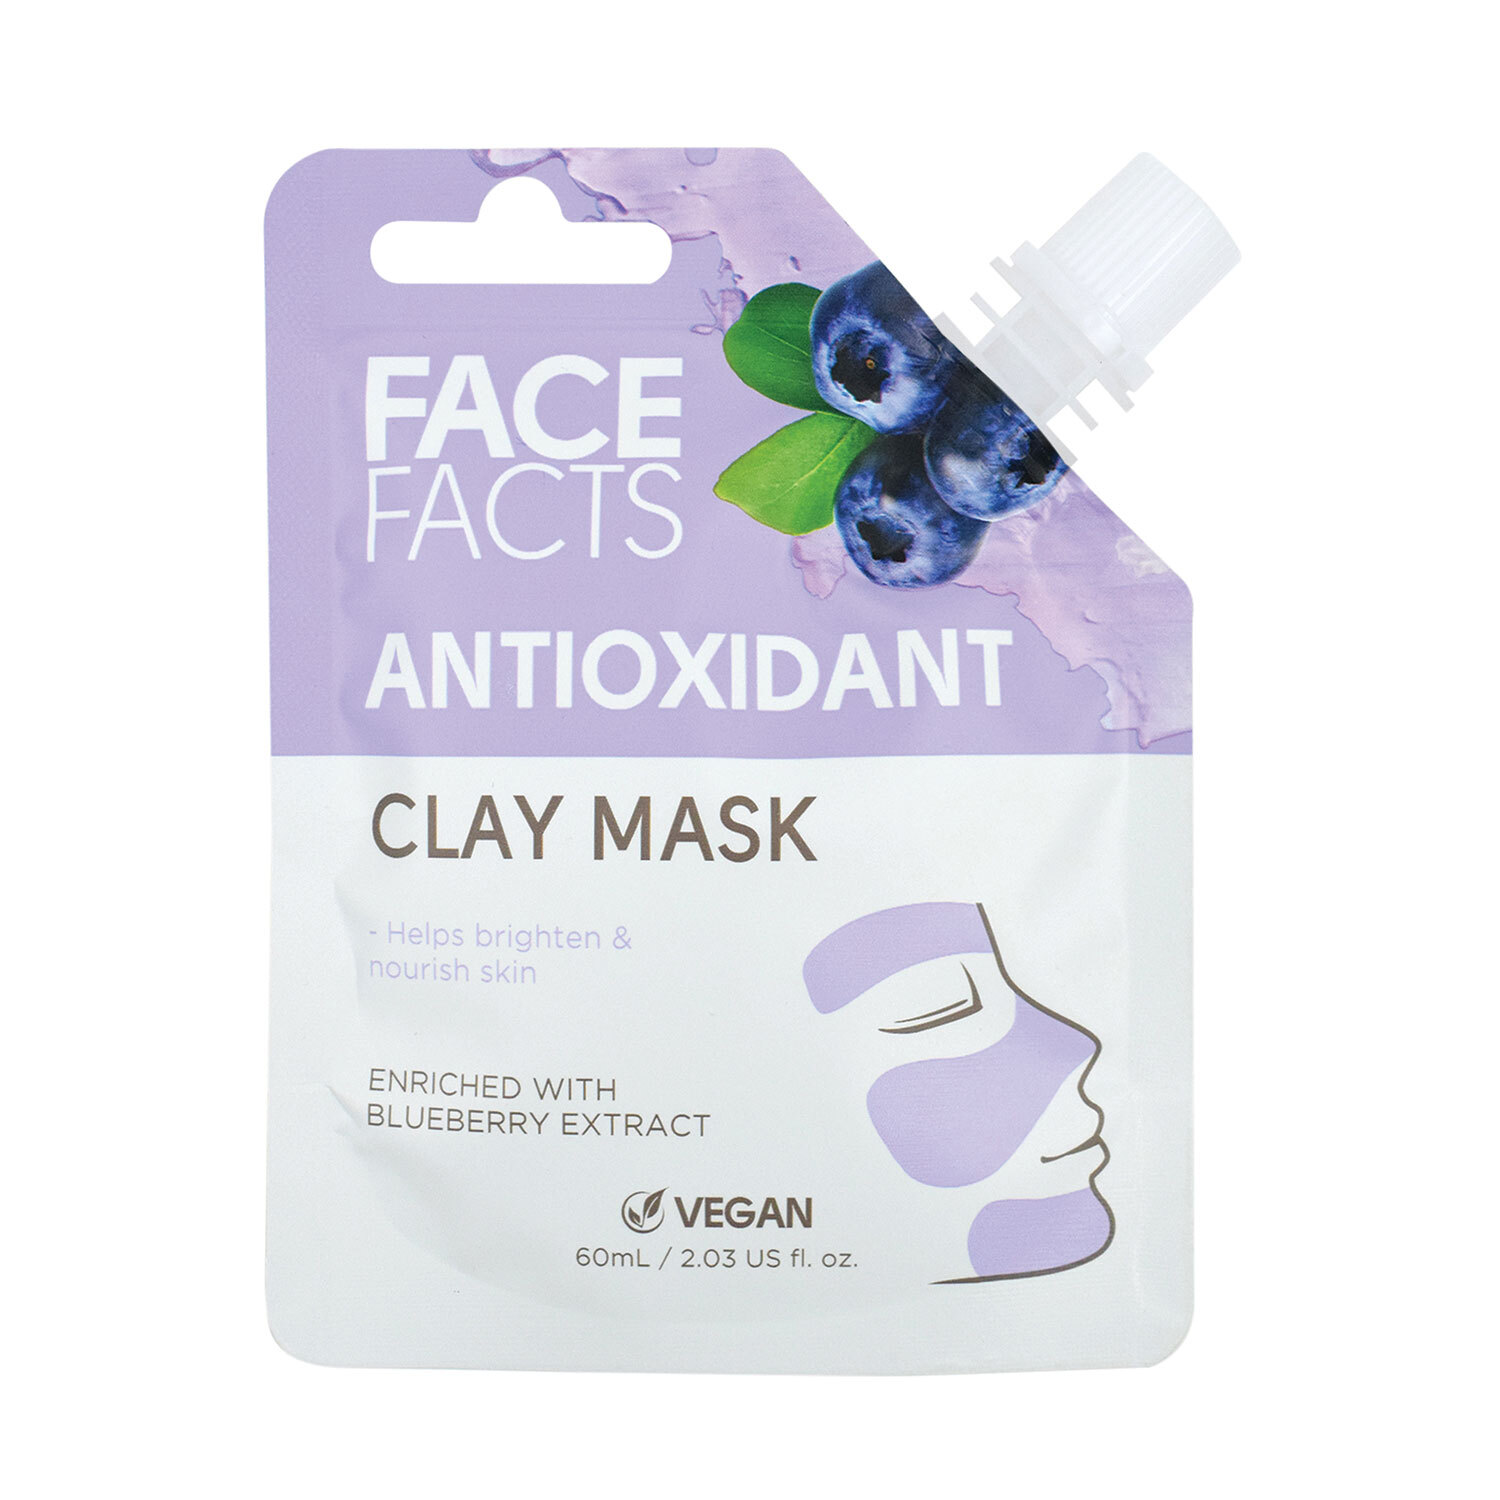 Face Facts Antioxidant Clay Mask - Purple Image